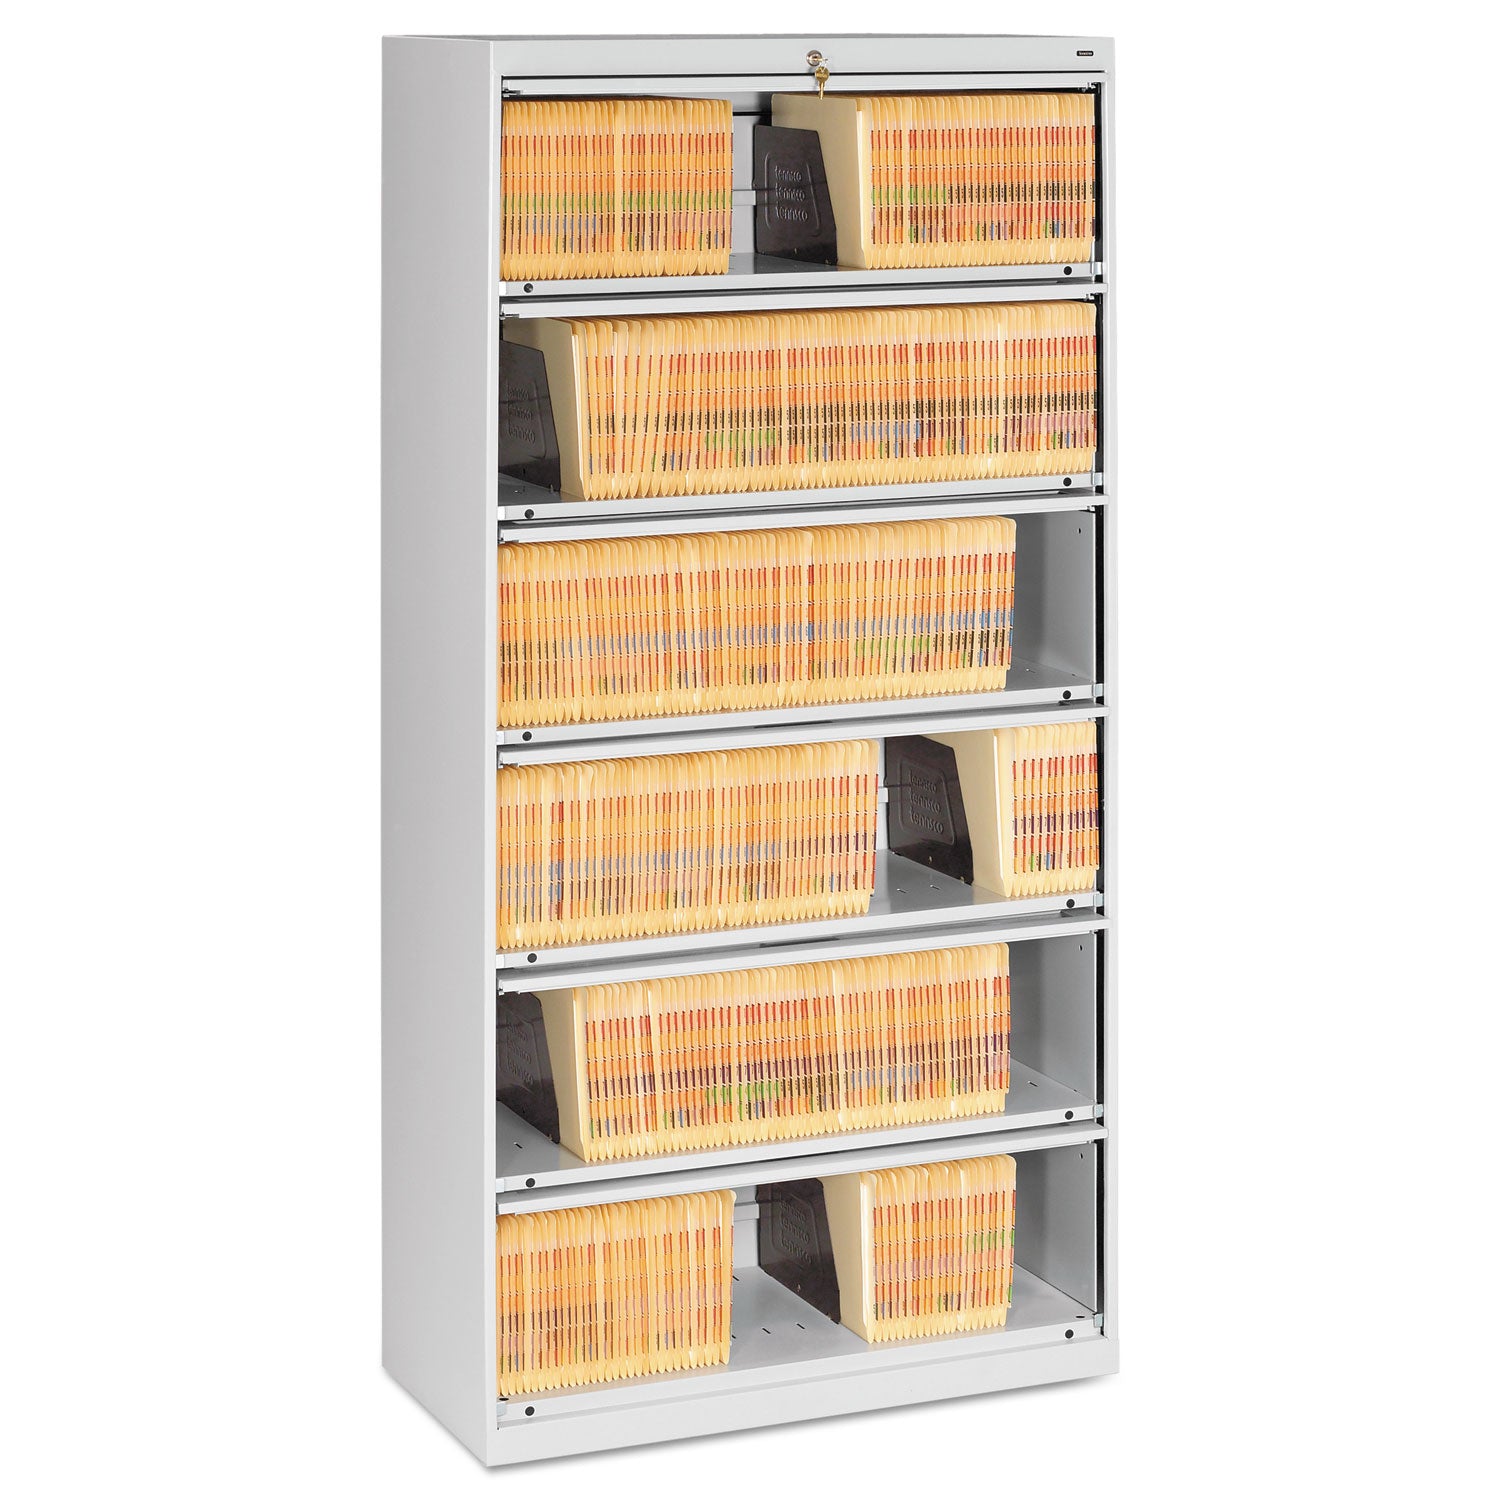 fixed-shelf-enclosed-format-lateral-file-for-end-tab-folders-6-legal-letter-file-shelves-light-gray-36-x-165-x-7525_tnnfs361llgy - 1